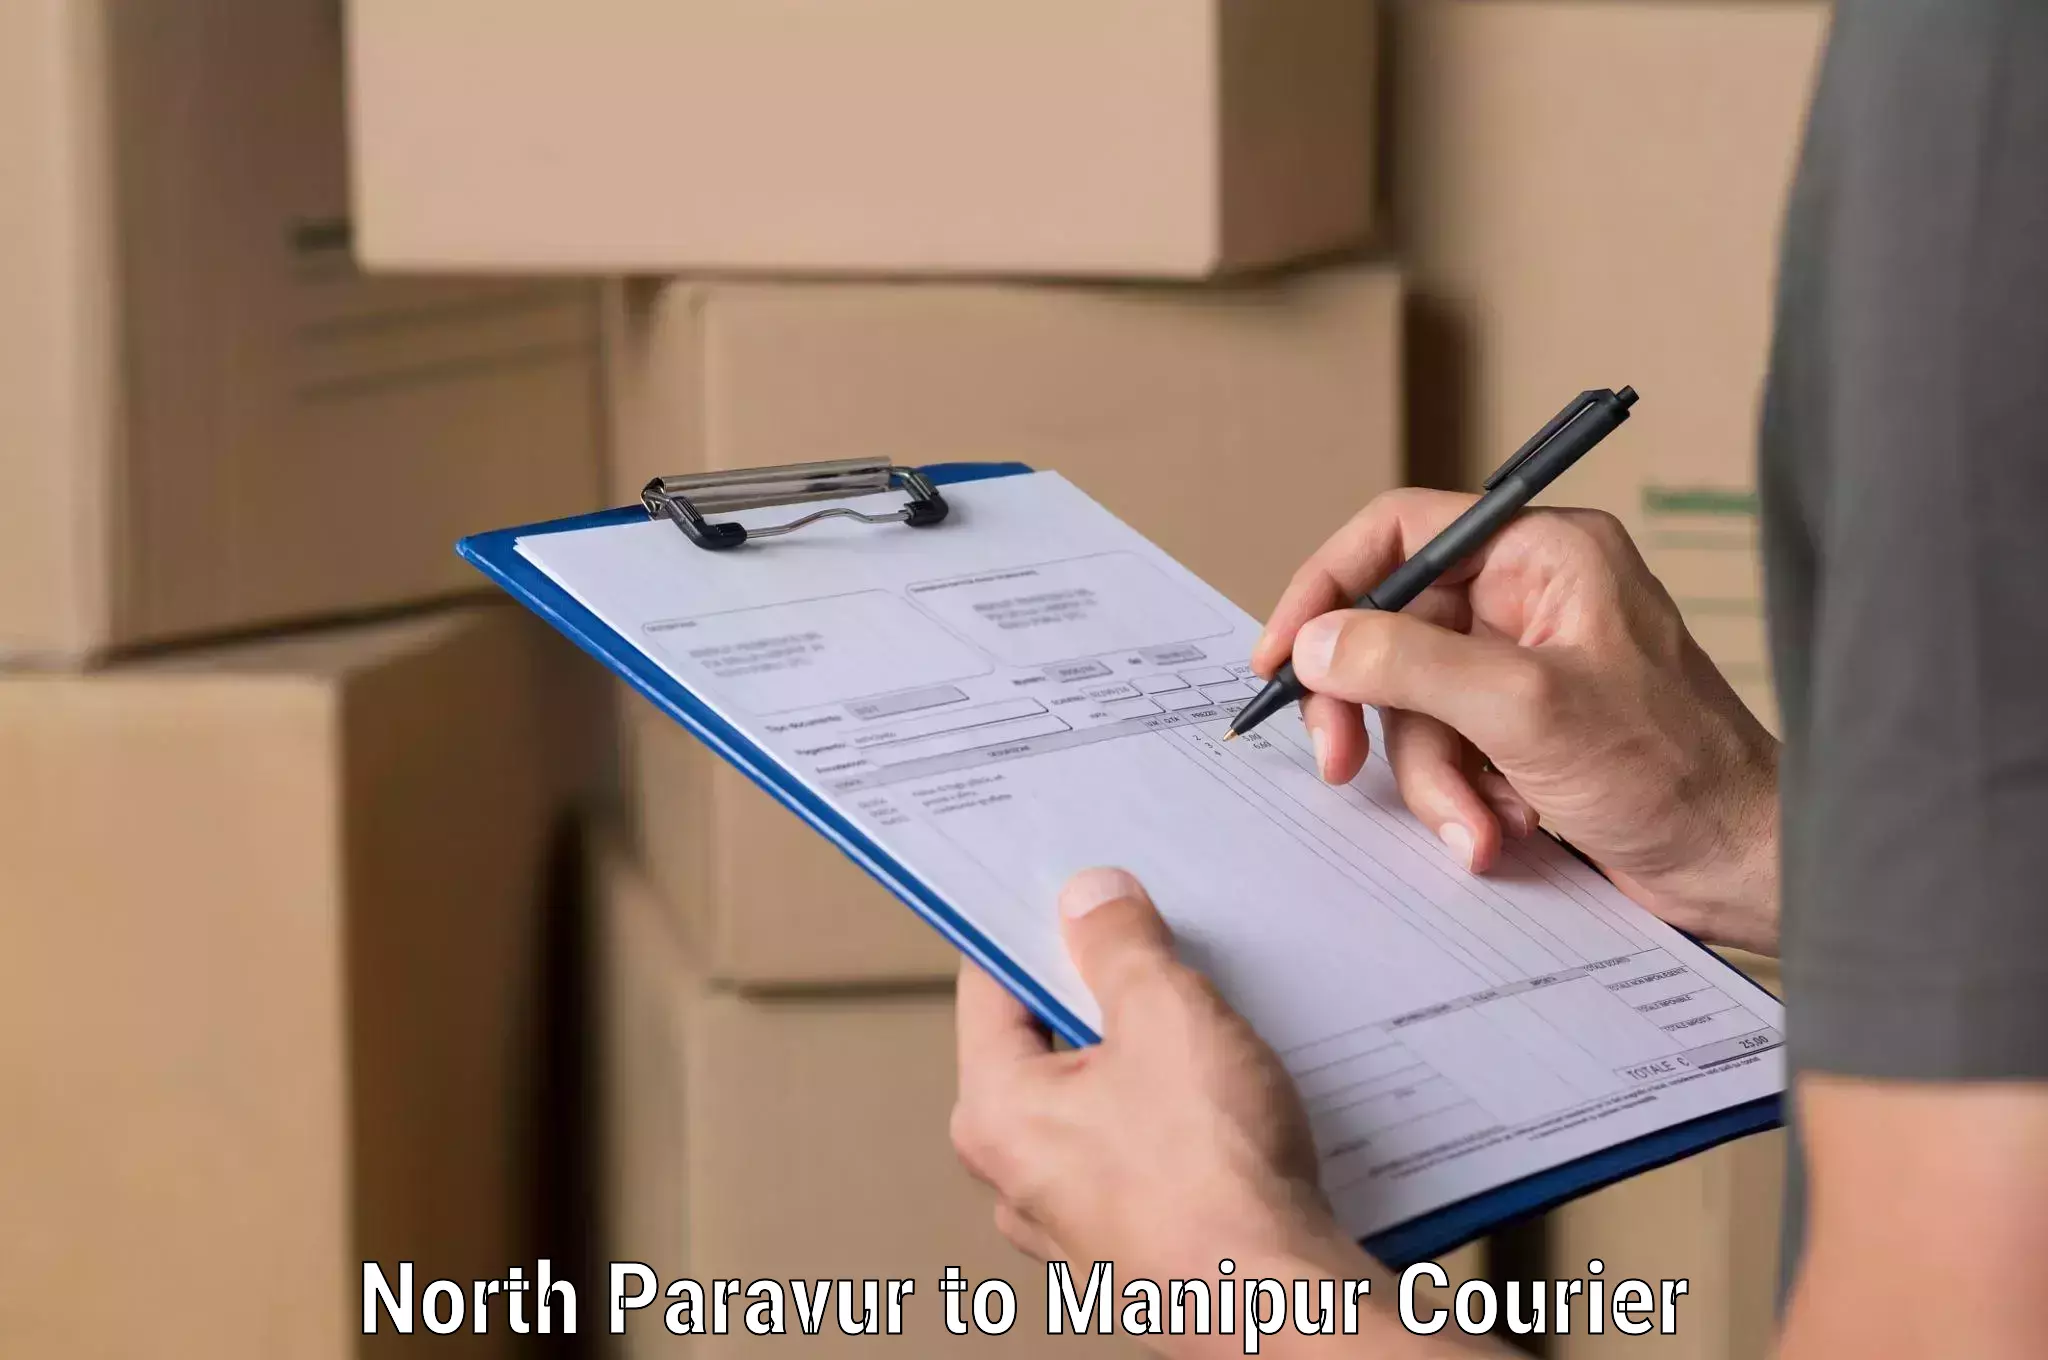 Reliable logistics providers North Paravur to Manipur